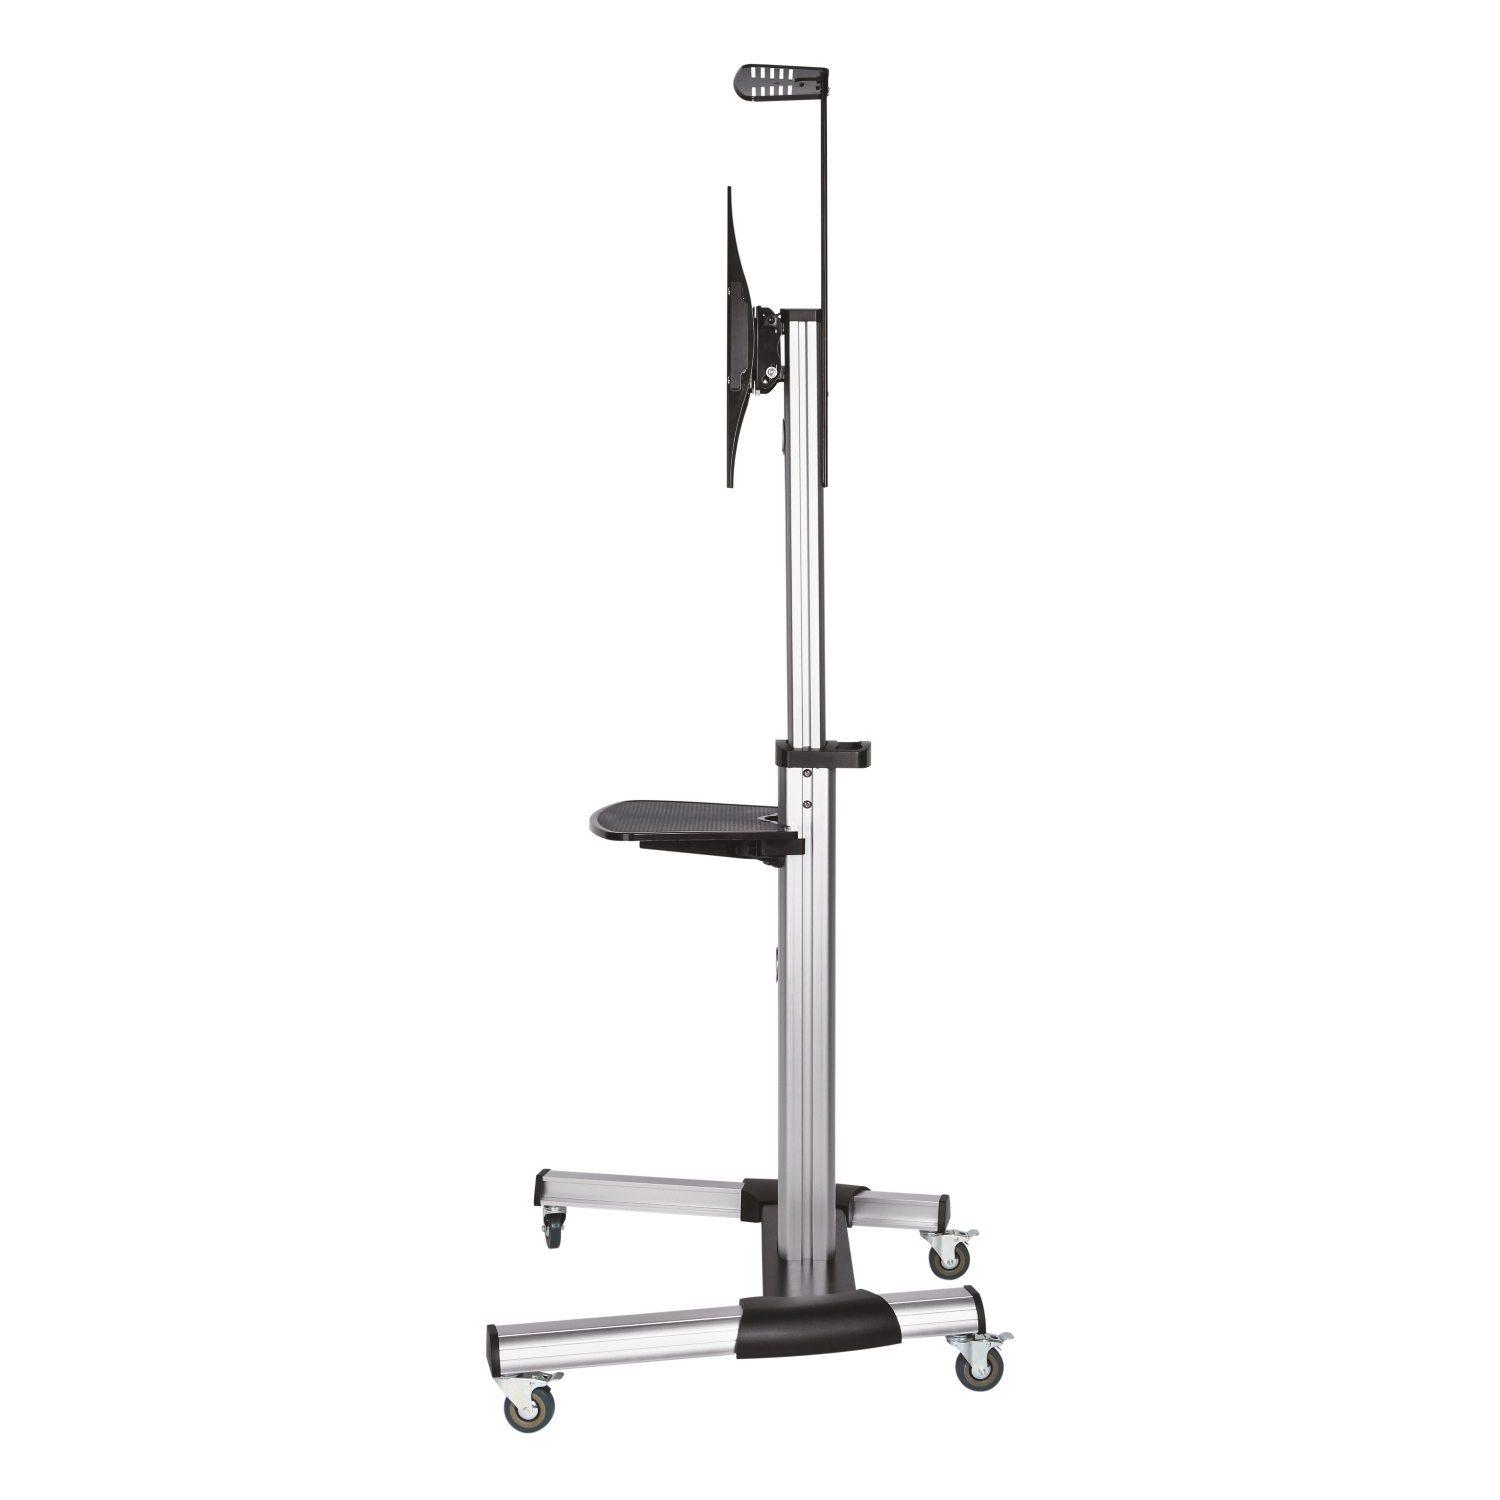 Aisens Eco Floor Stand with Wheels - DVD Tray and Camera Stand (37?-70? TV) - Silver Color